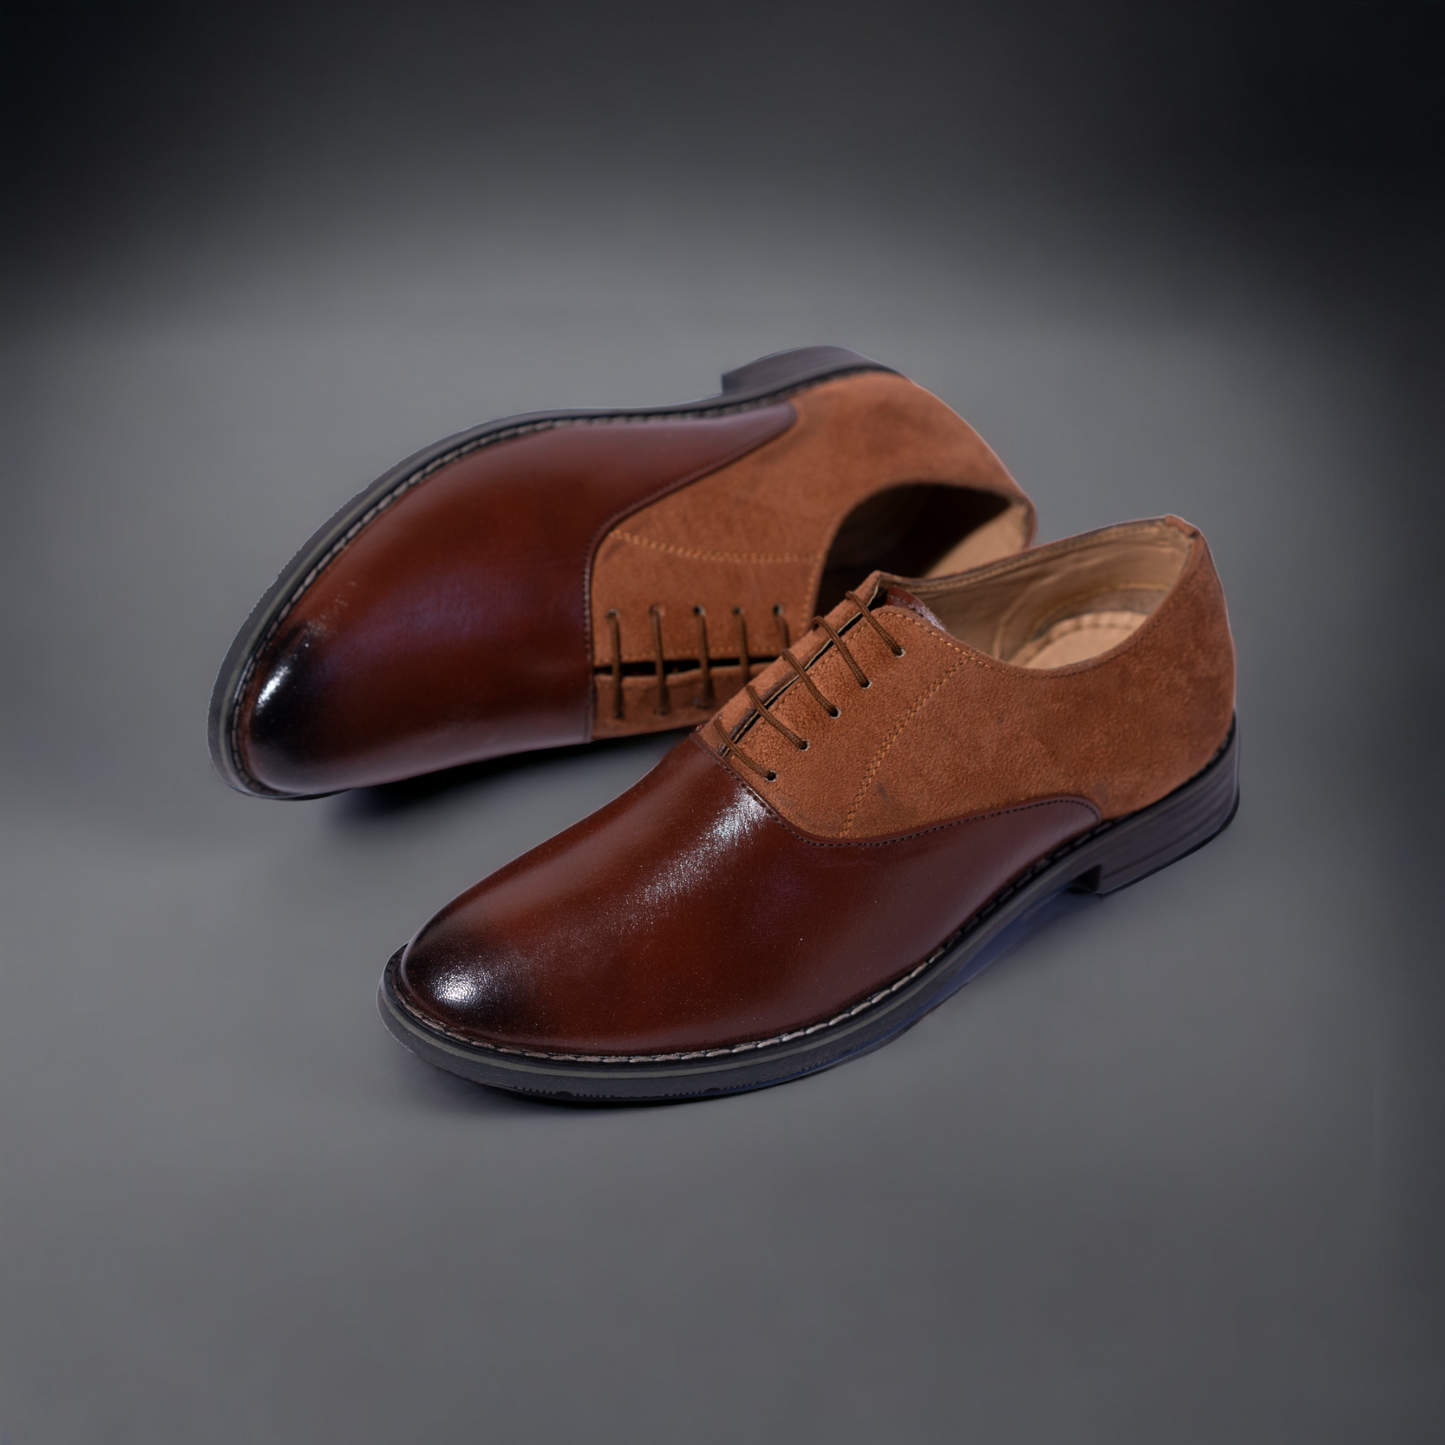 The Aurous Stride Laceup Formal Shoes - Tan